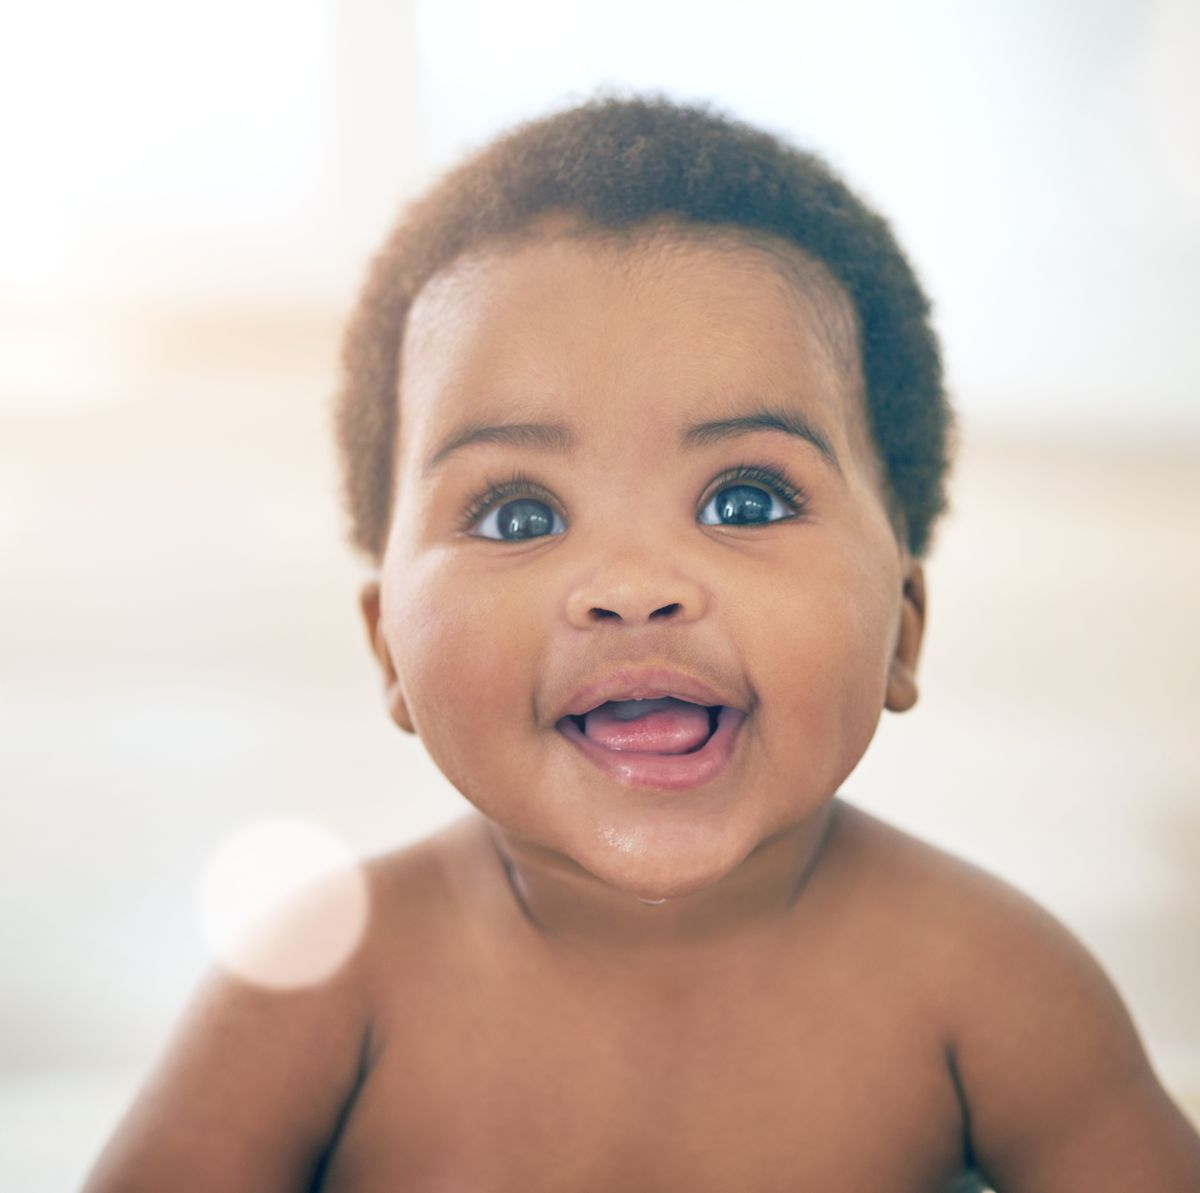 Cutest little baby faces: Meet TODAY's Babies of the Week